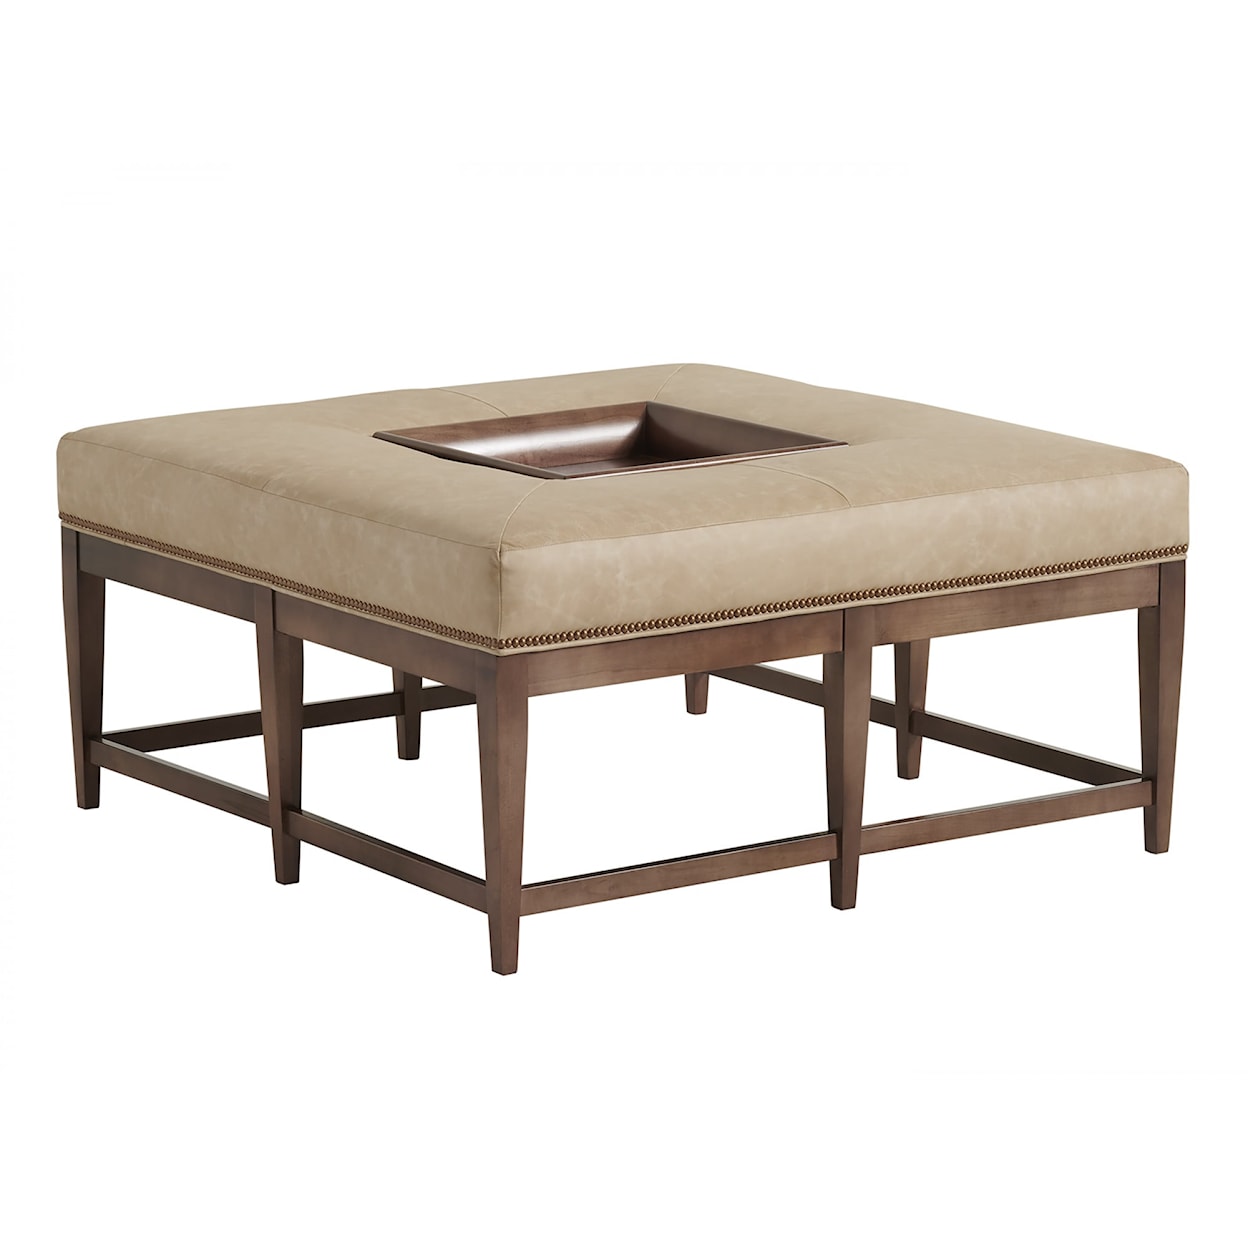 Lexington Leather Carillon Ottoman with Removable Tray